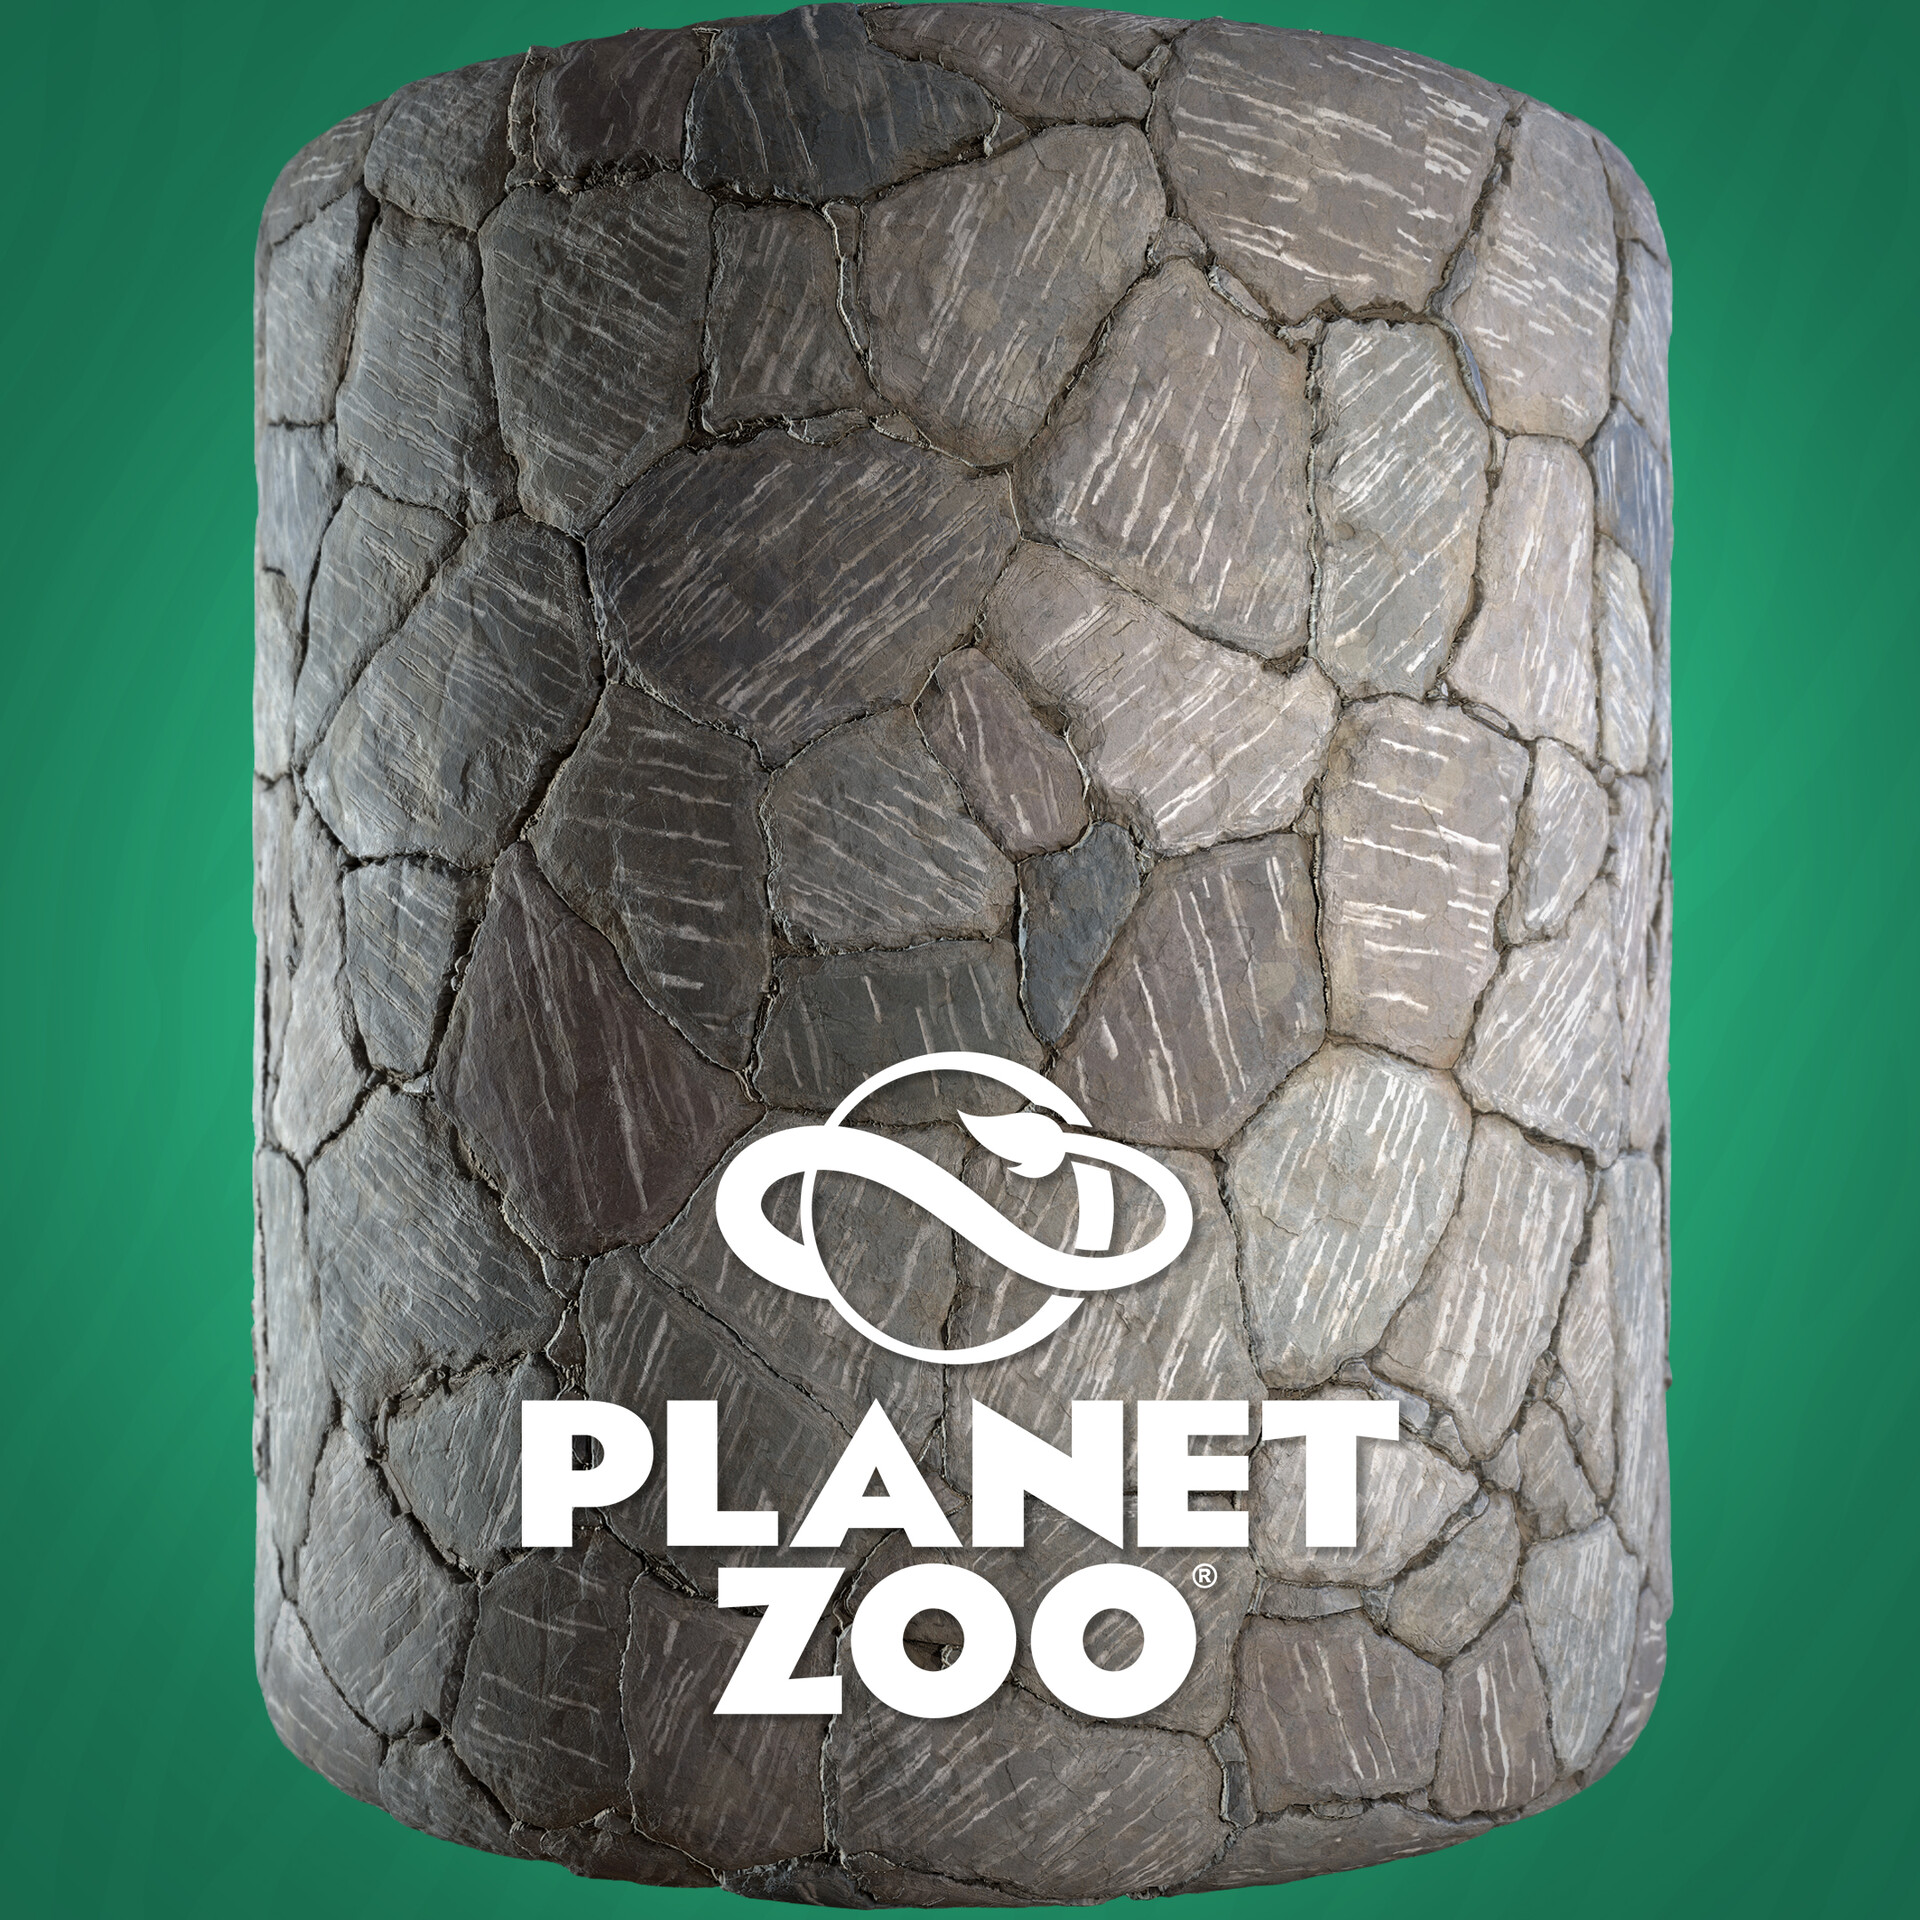 Planet Zoo Tiling Materials